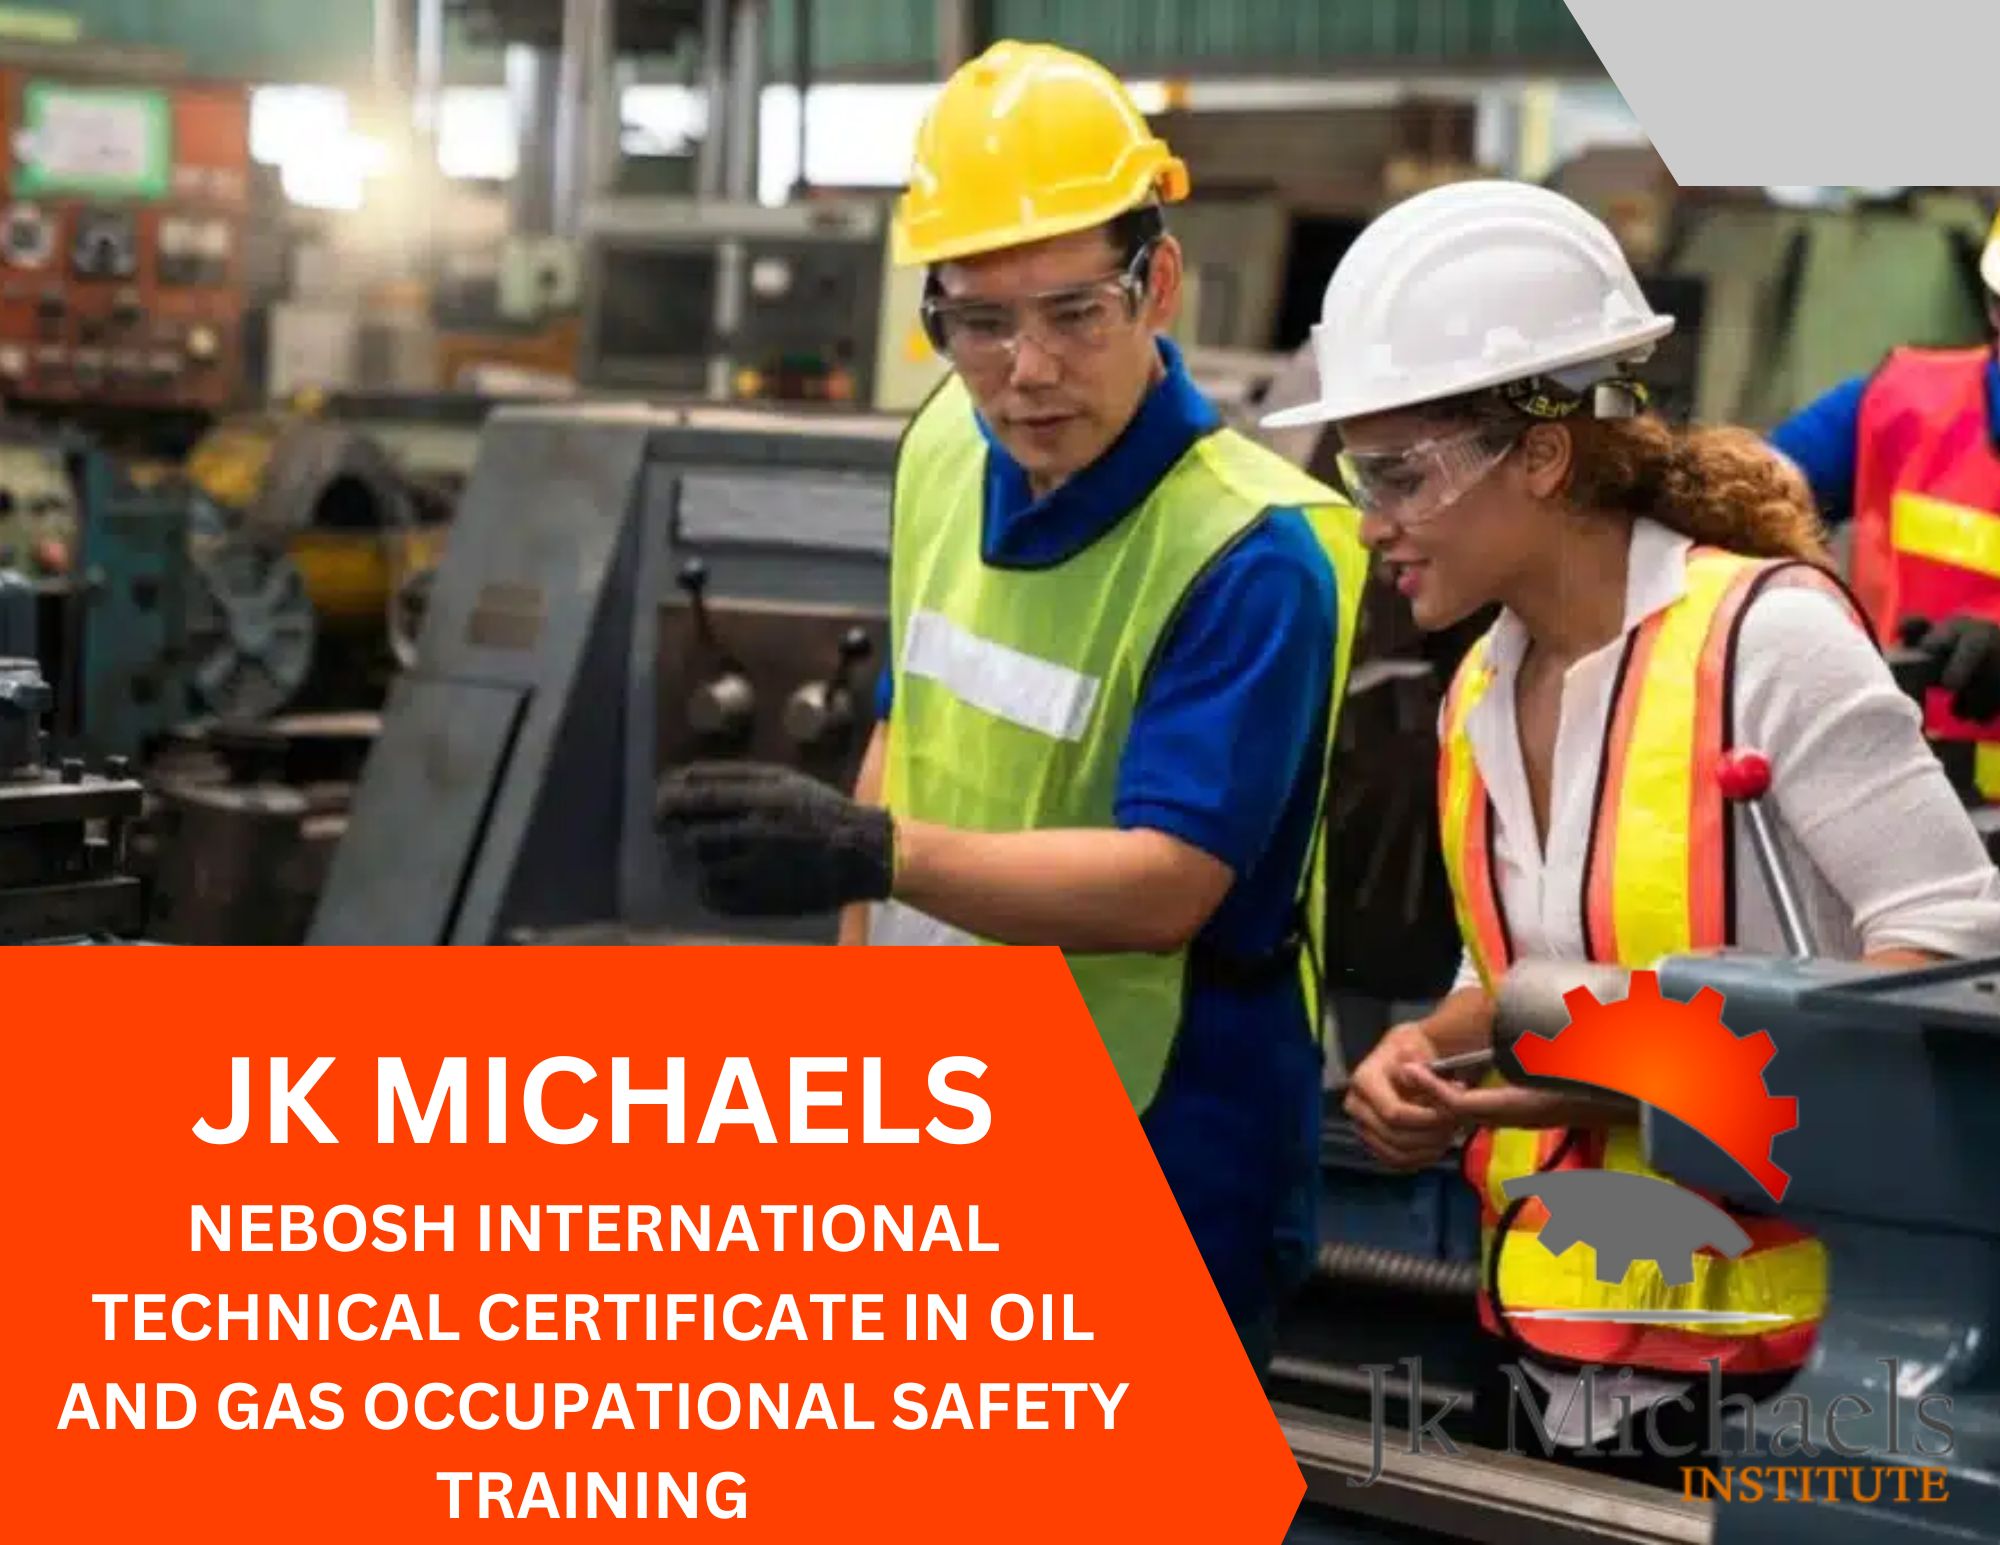 NEBOSH INTERNATIONAL TECHNICAL CERTIFICATE IN OIL AND GAS OCCUPATIONAL SAFETY TRAINING